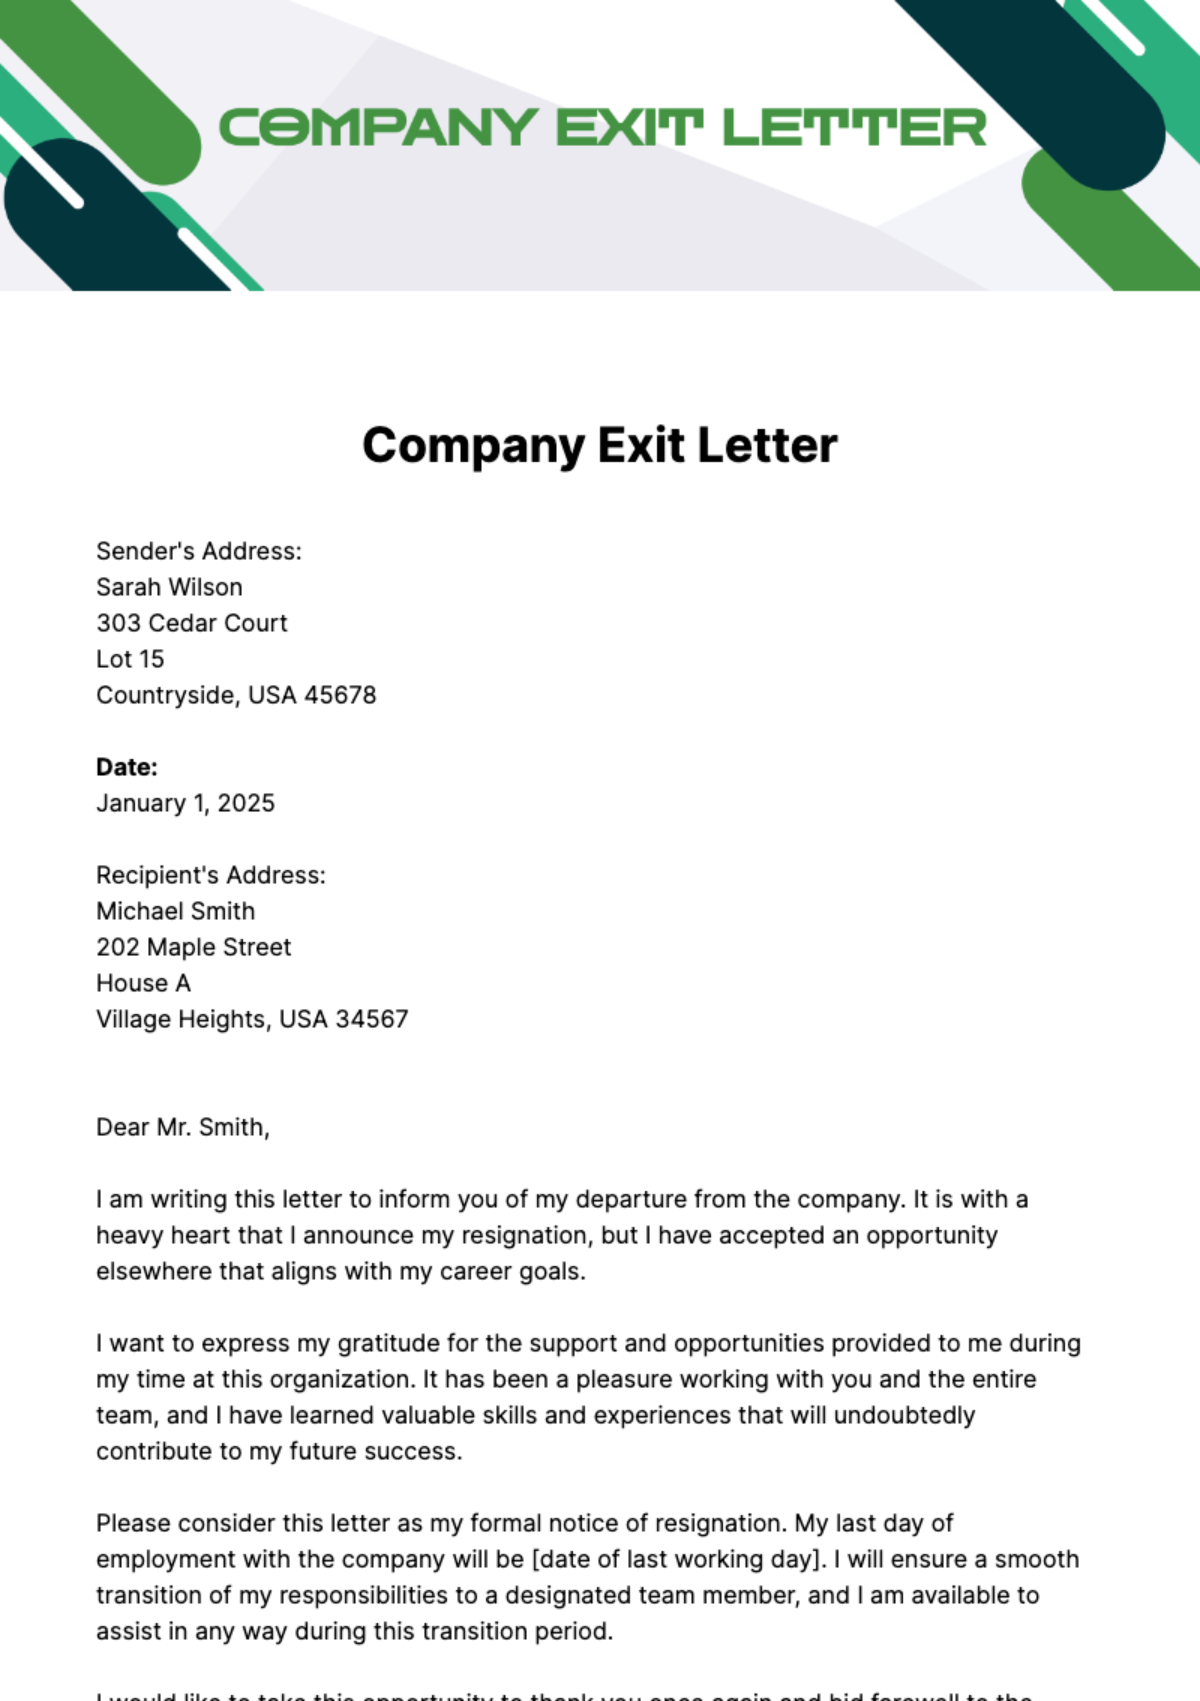 Free Company Exit Letter Template